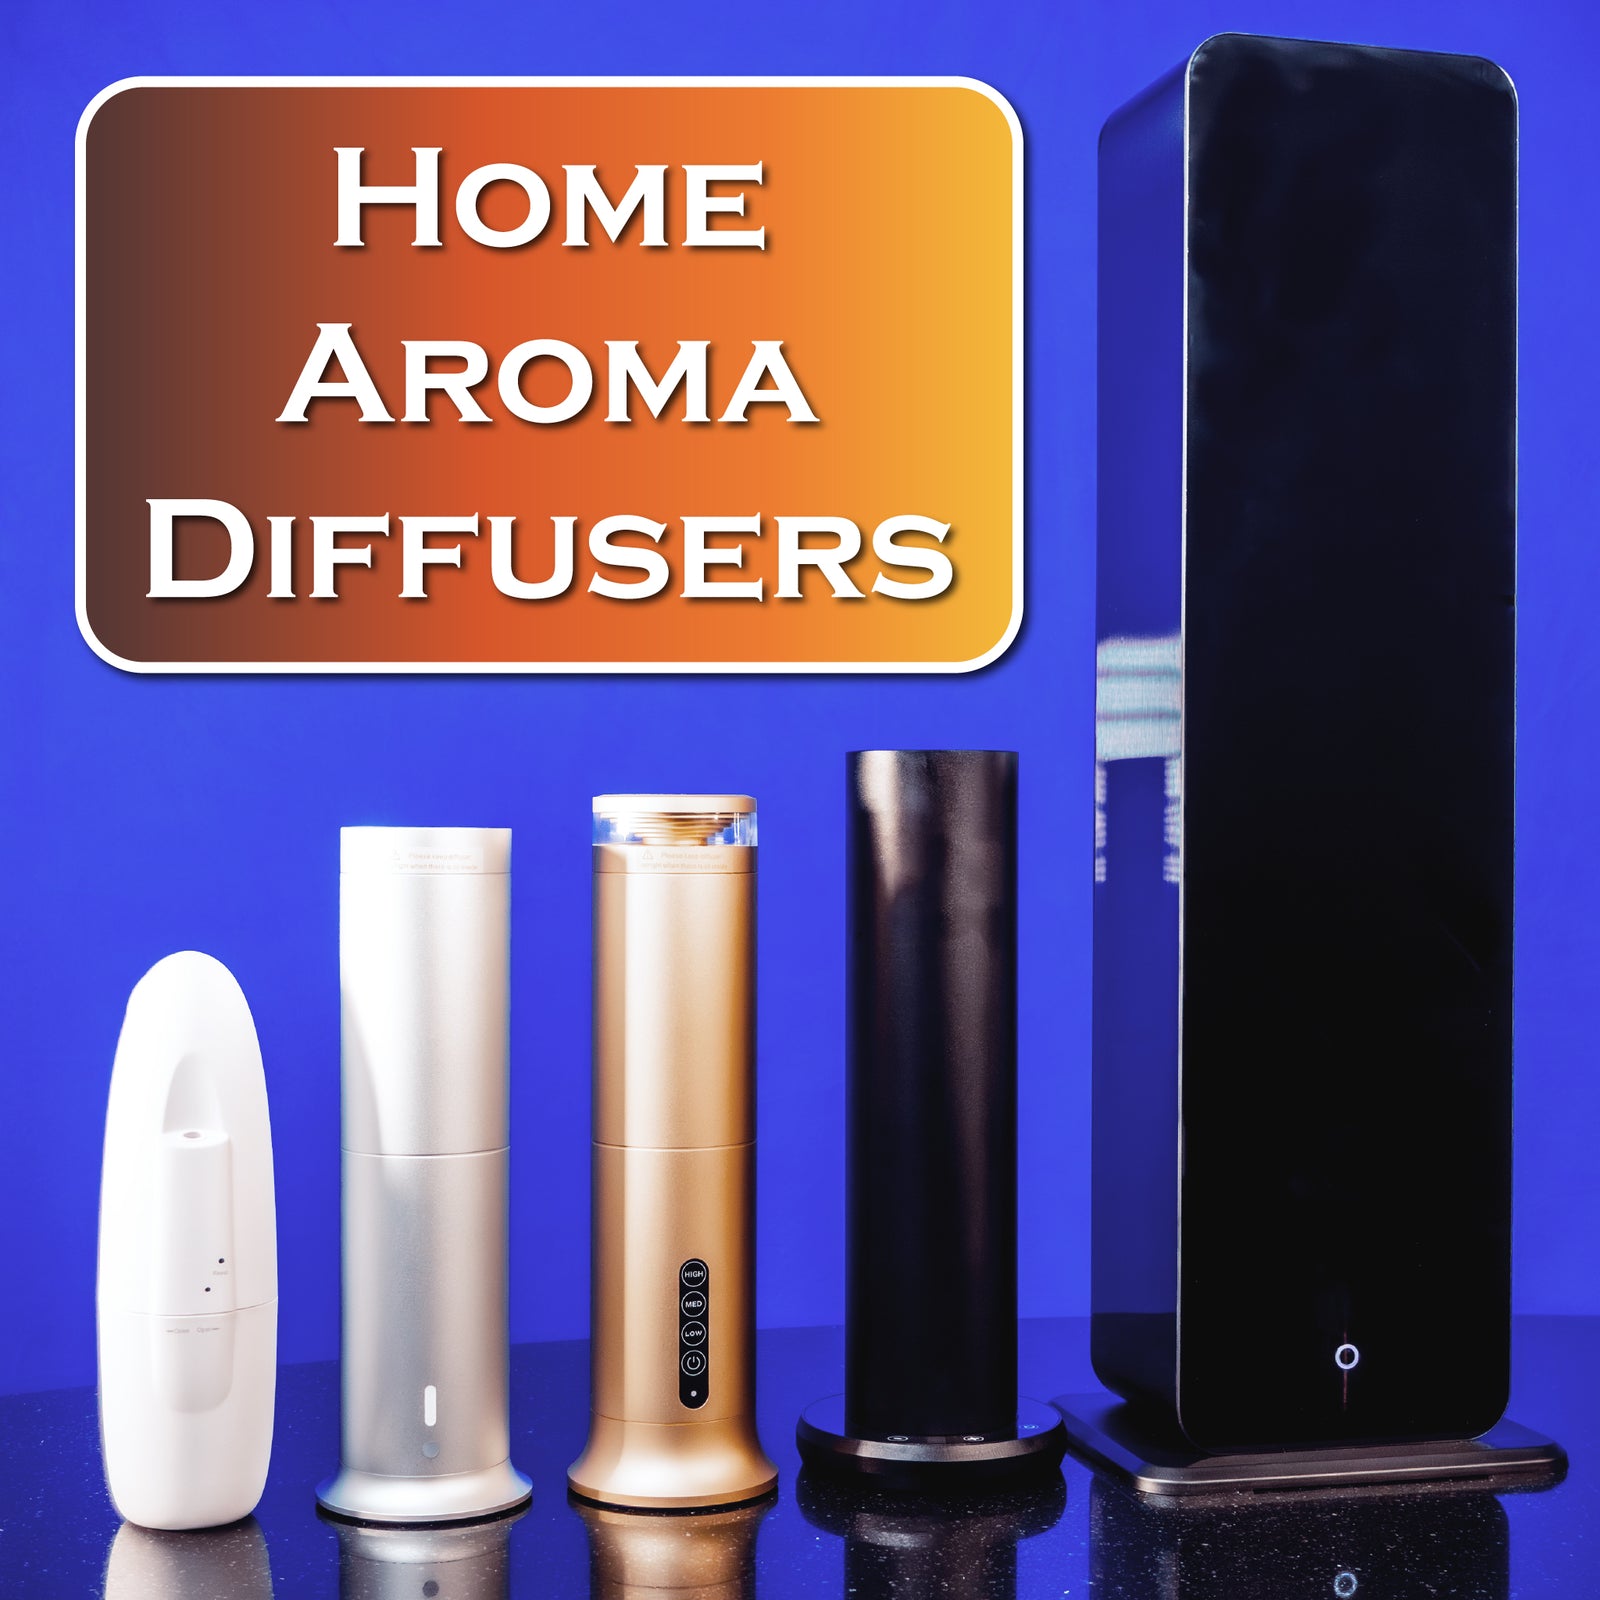 Home Aroma Diffusers